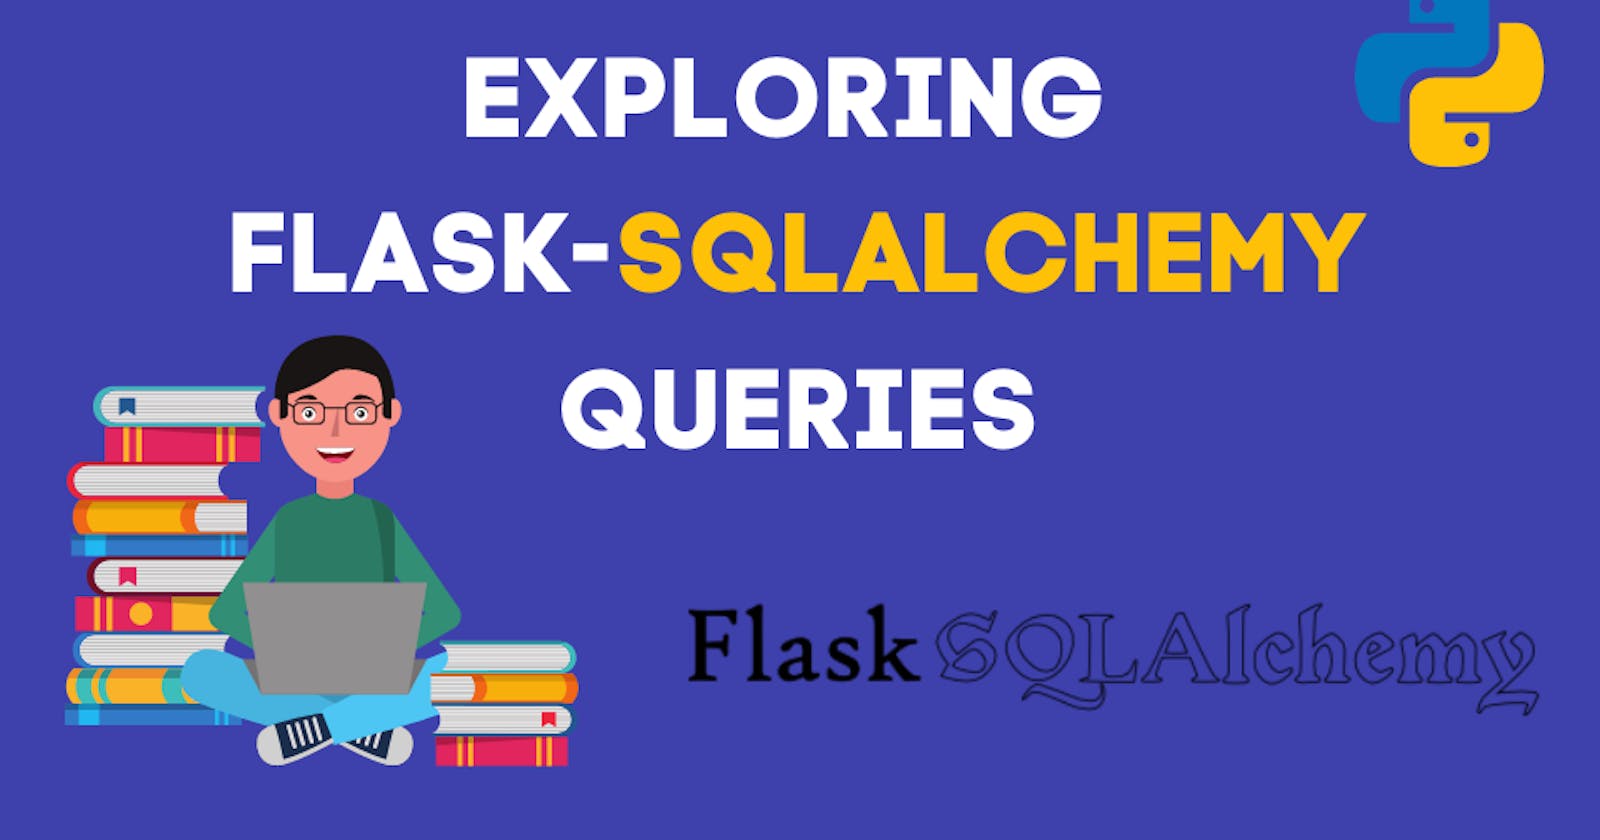 Exploring Flask-SQLAlchemy Queries